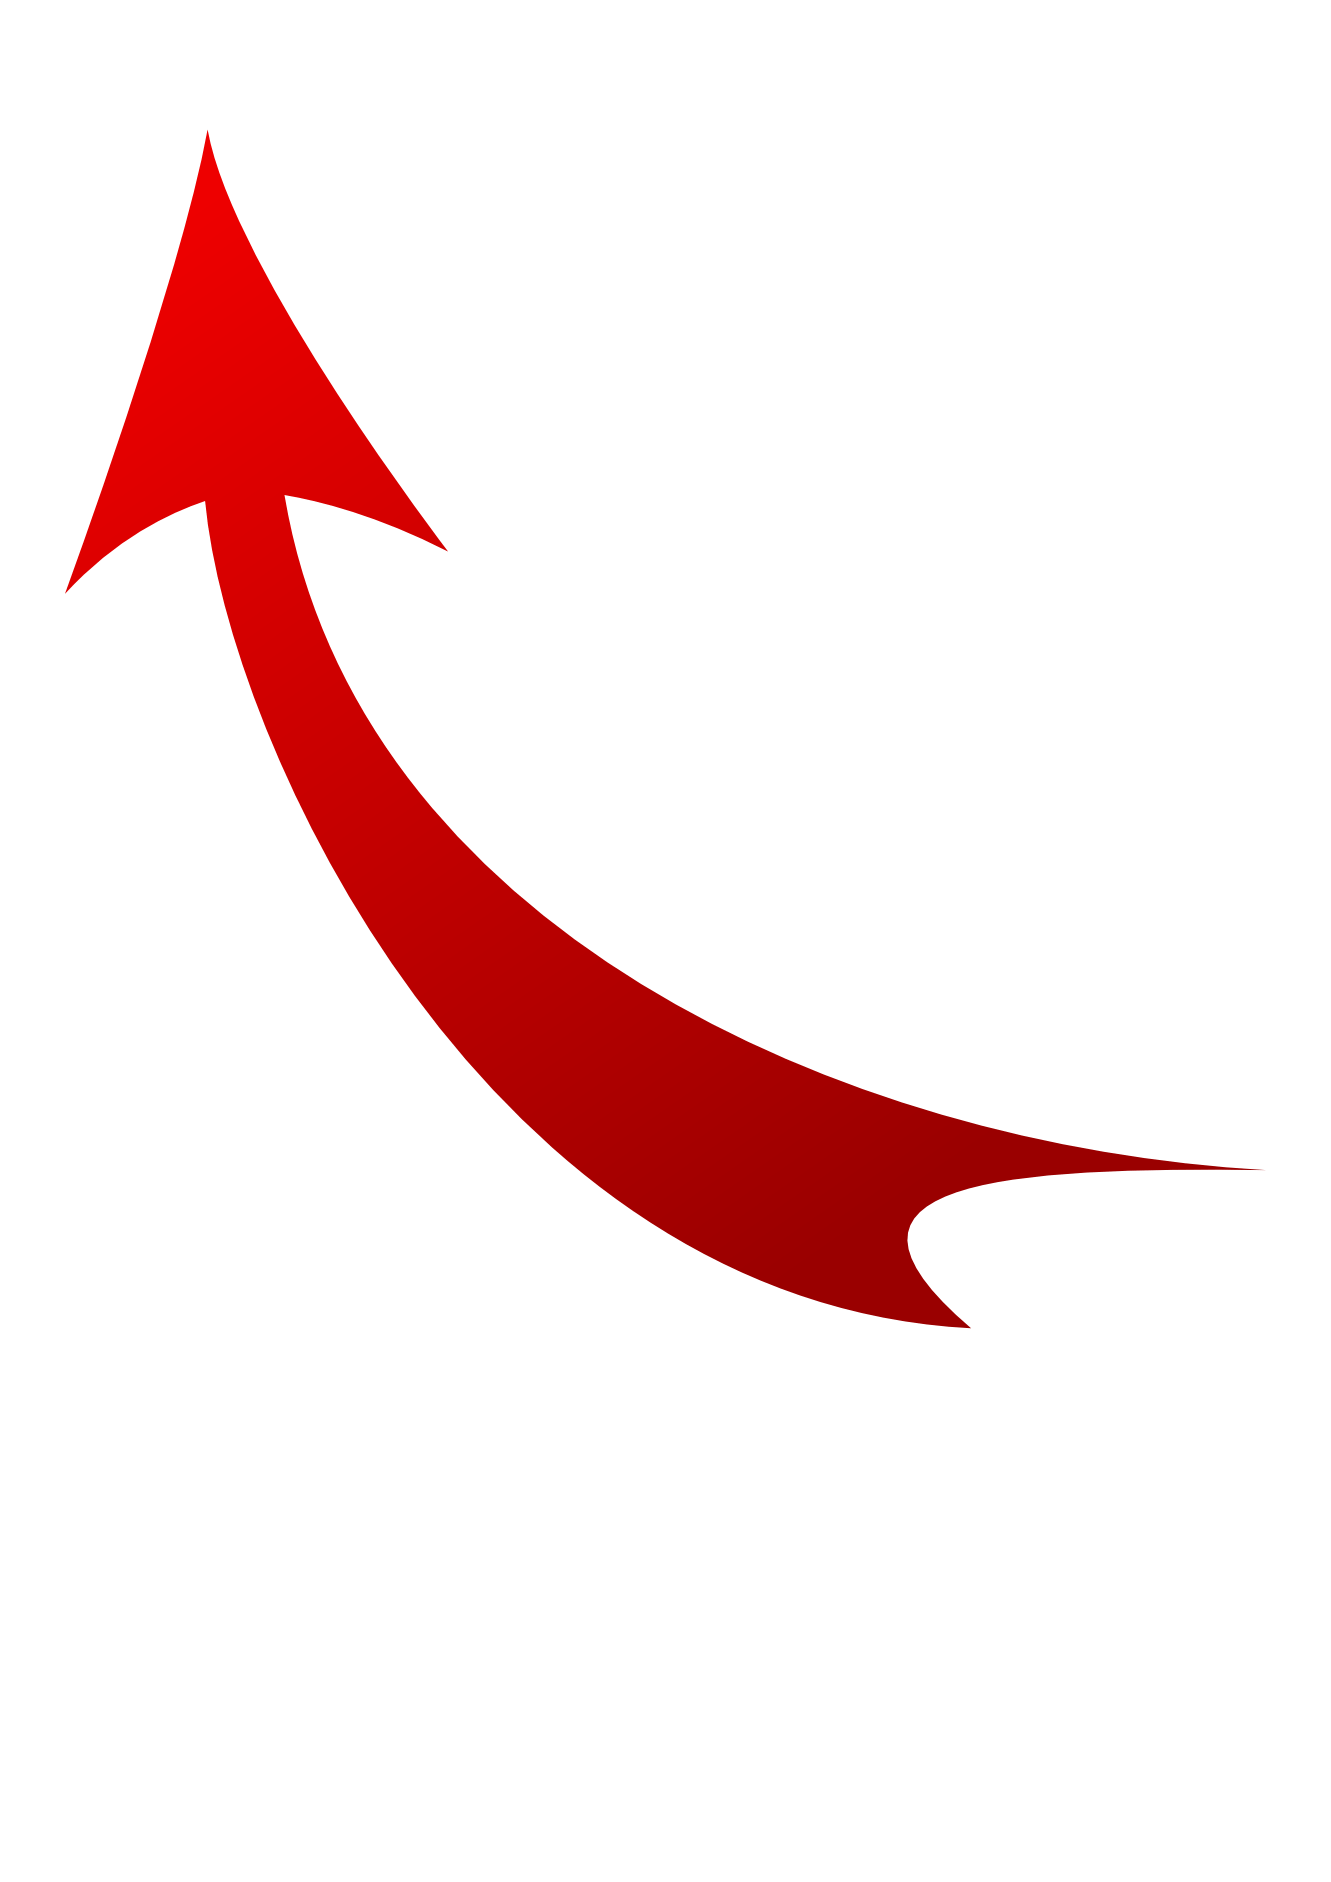 Diagonal Red Arrow Logo - Download Free Red Arrow PNG Image Icon and PNG Background